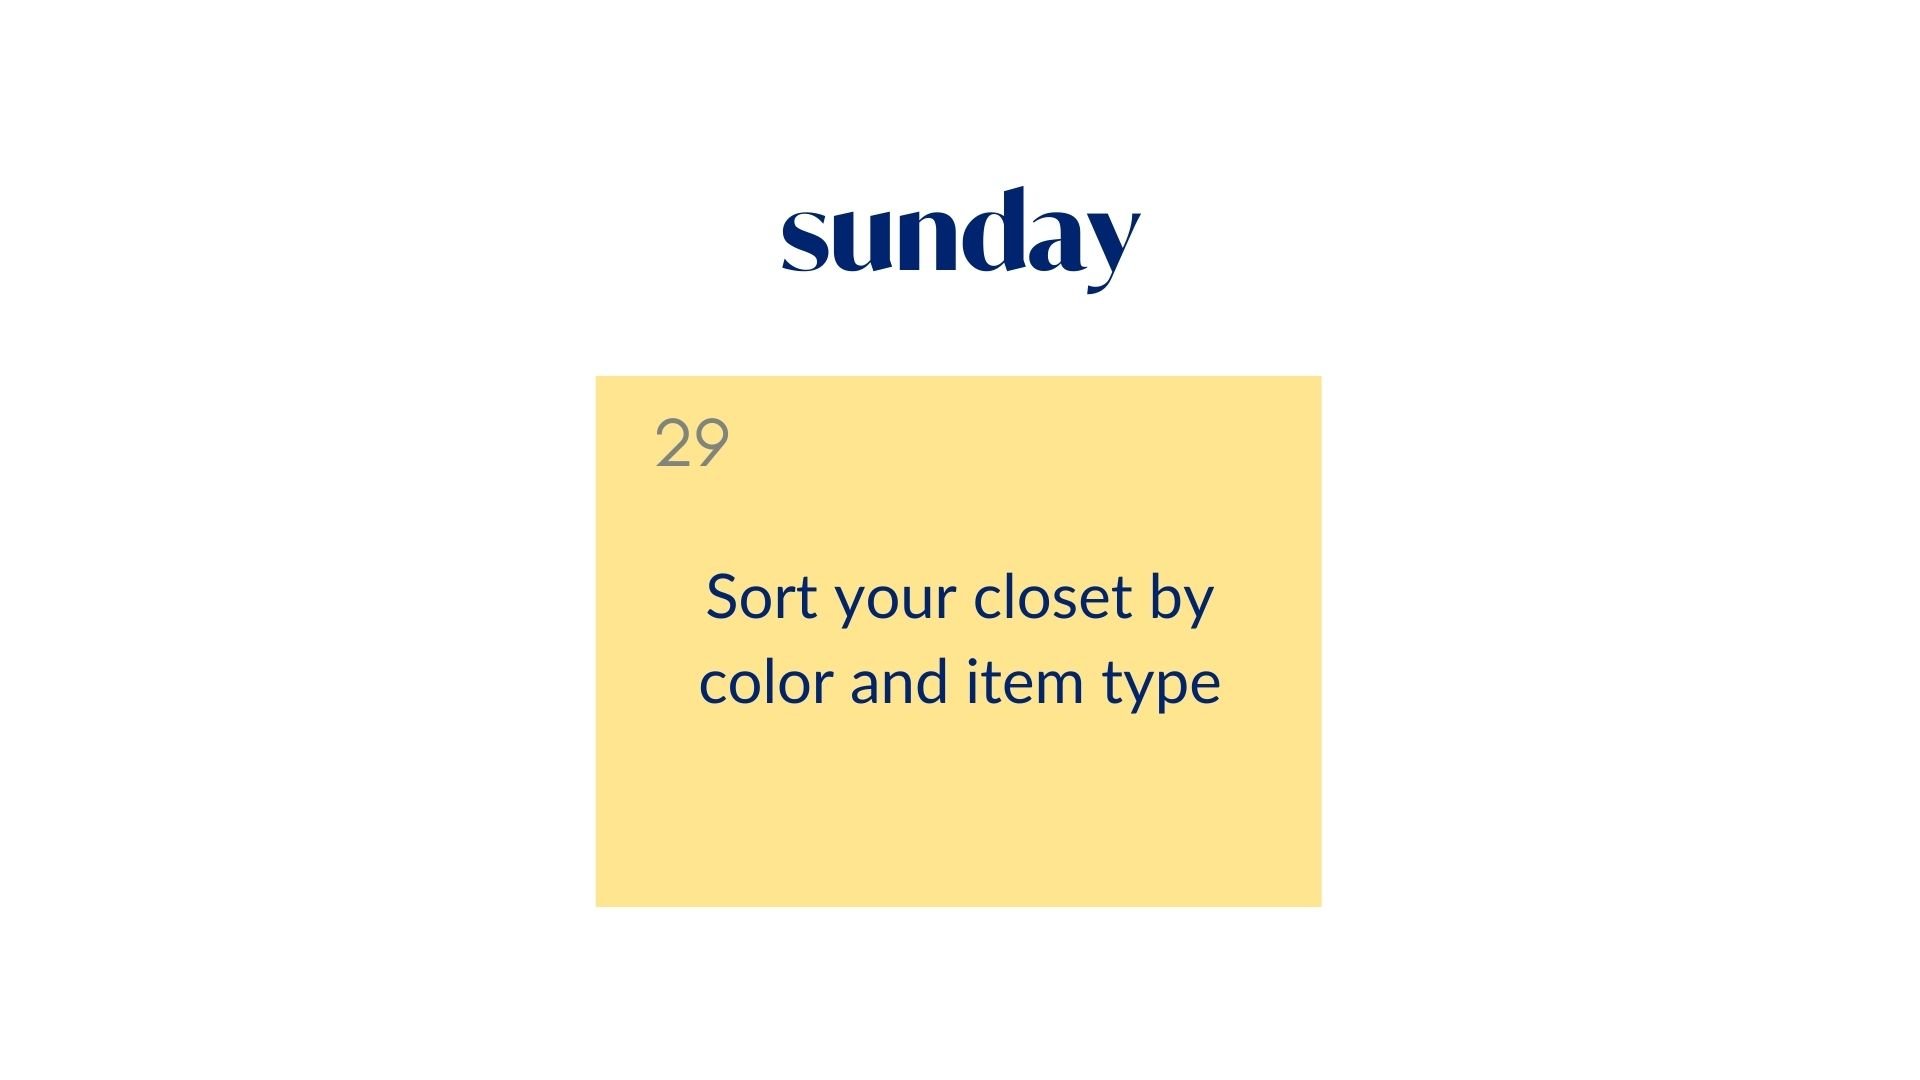 Day 29: Sort your closet by color and item type